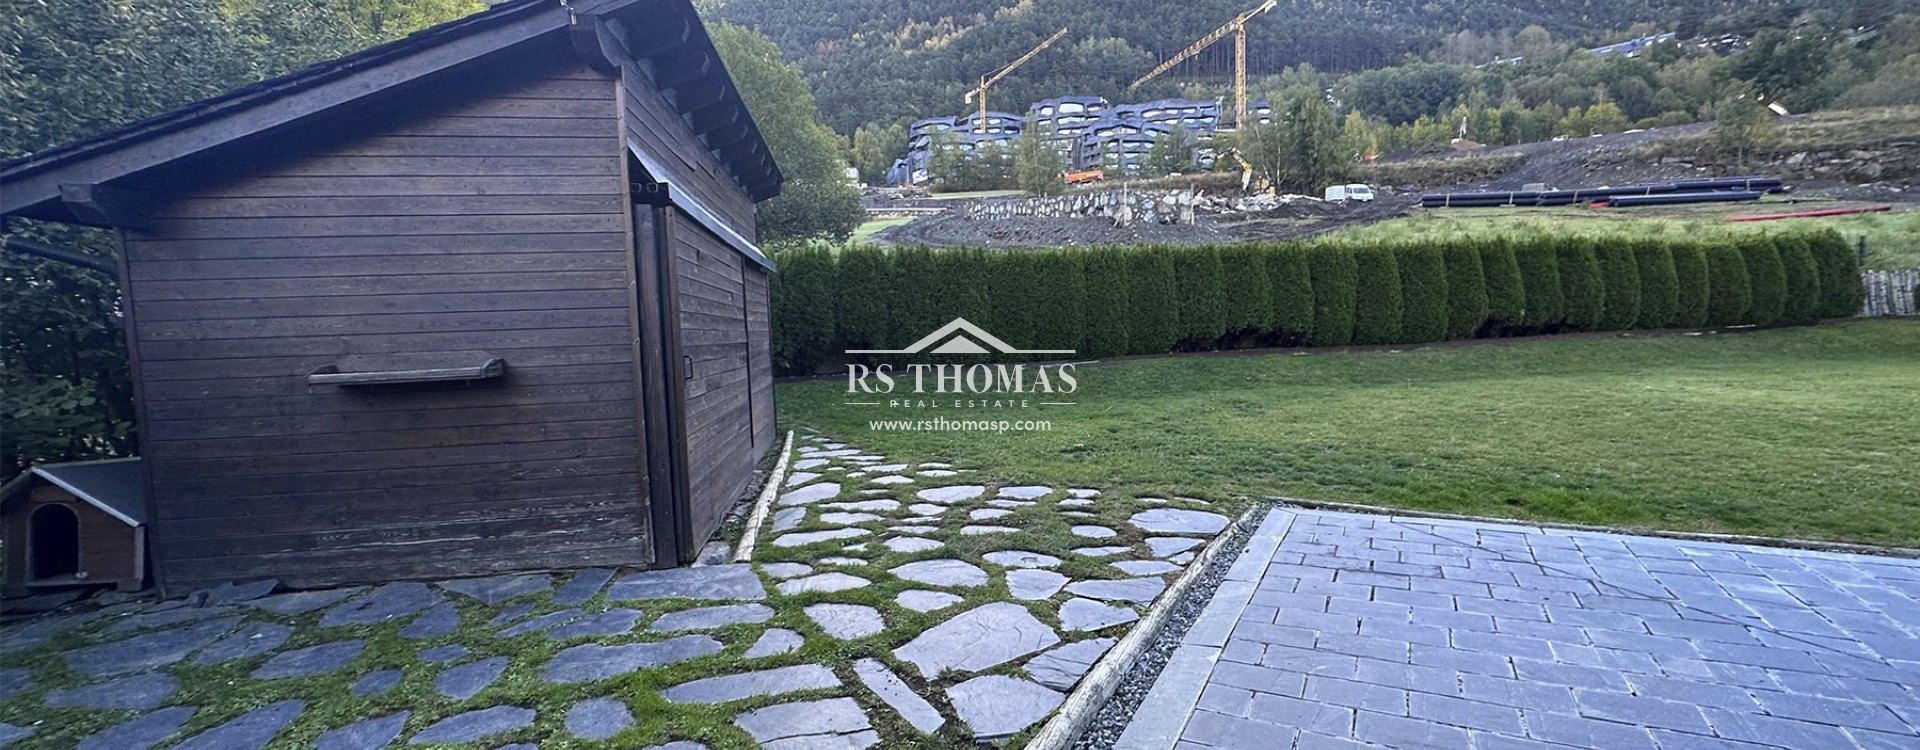 House for sale in Ordino